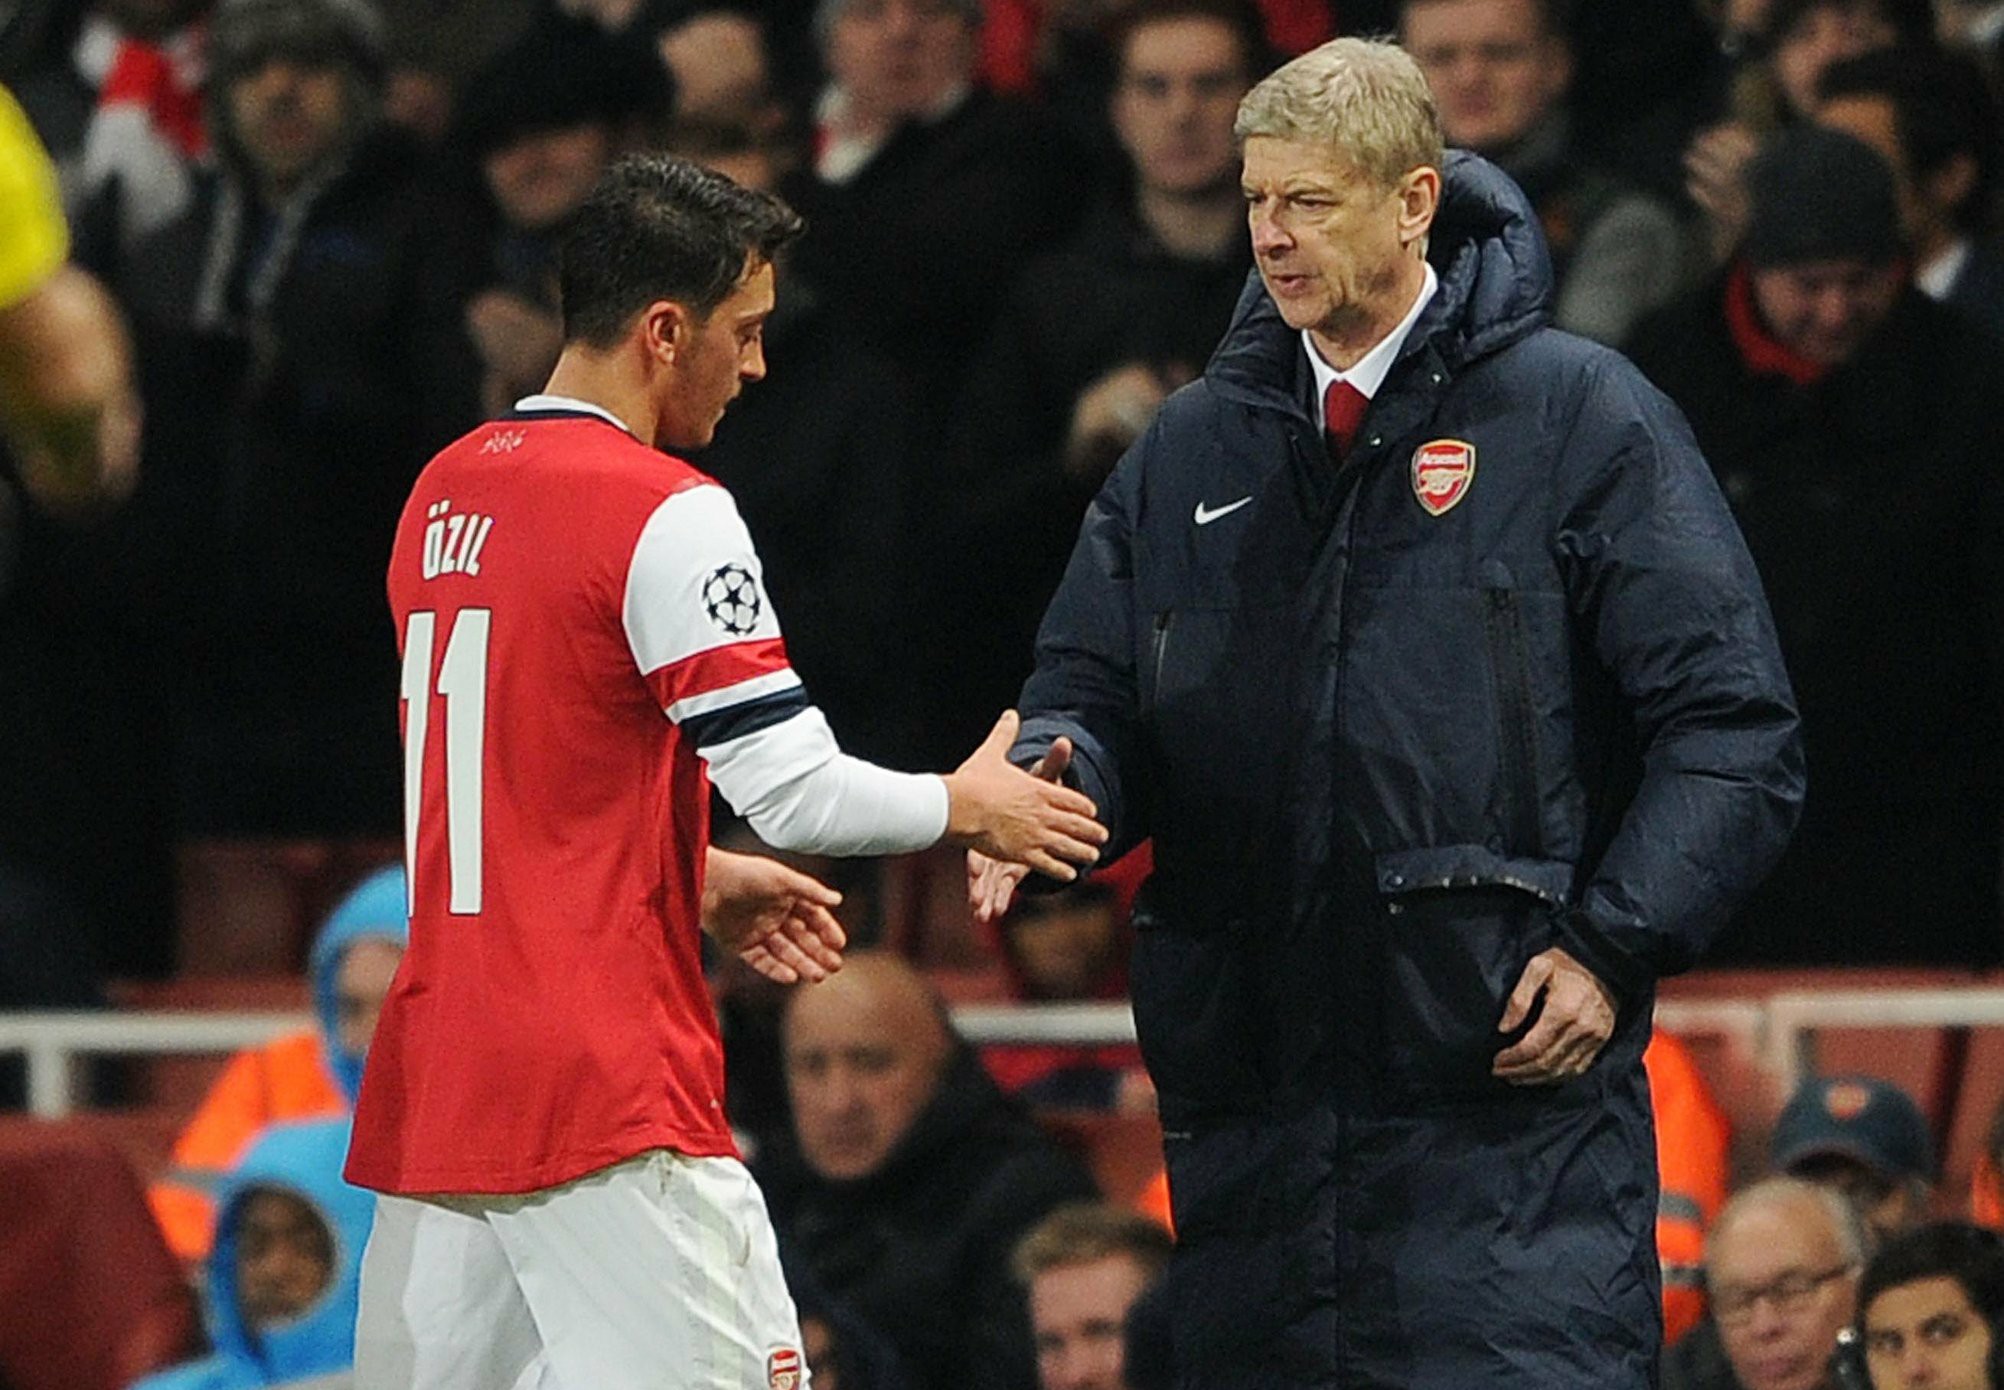 Mesut Ozil Reveals What Wenger Is All About! - Arsenal True Fans